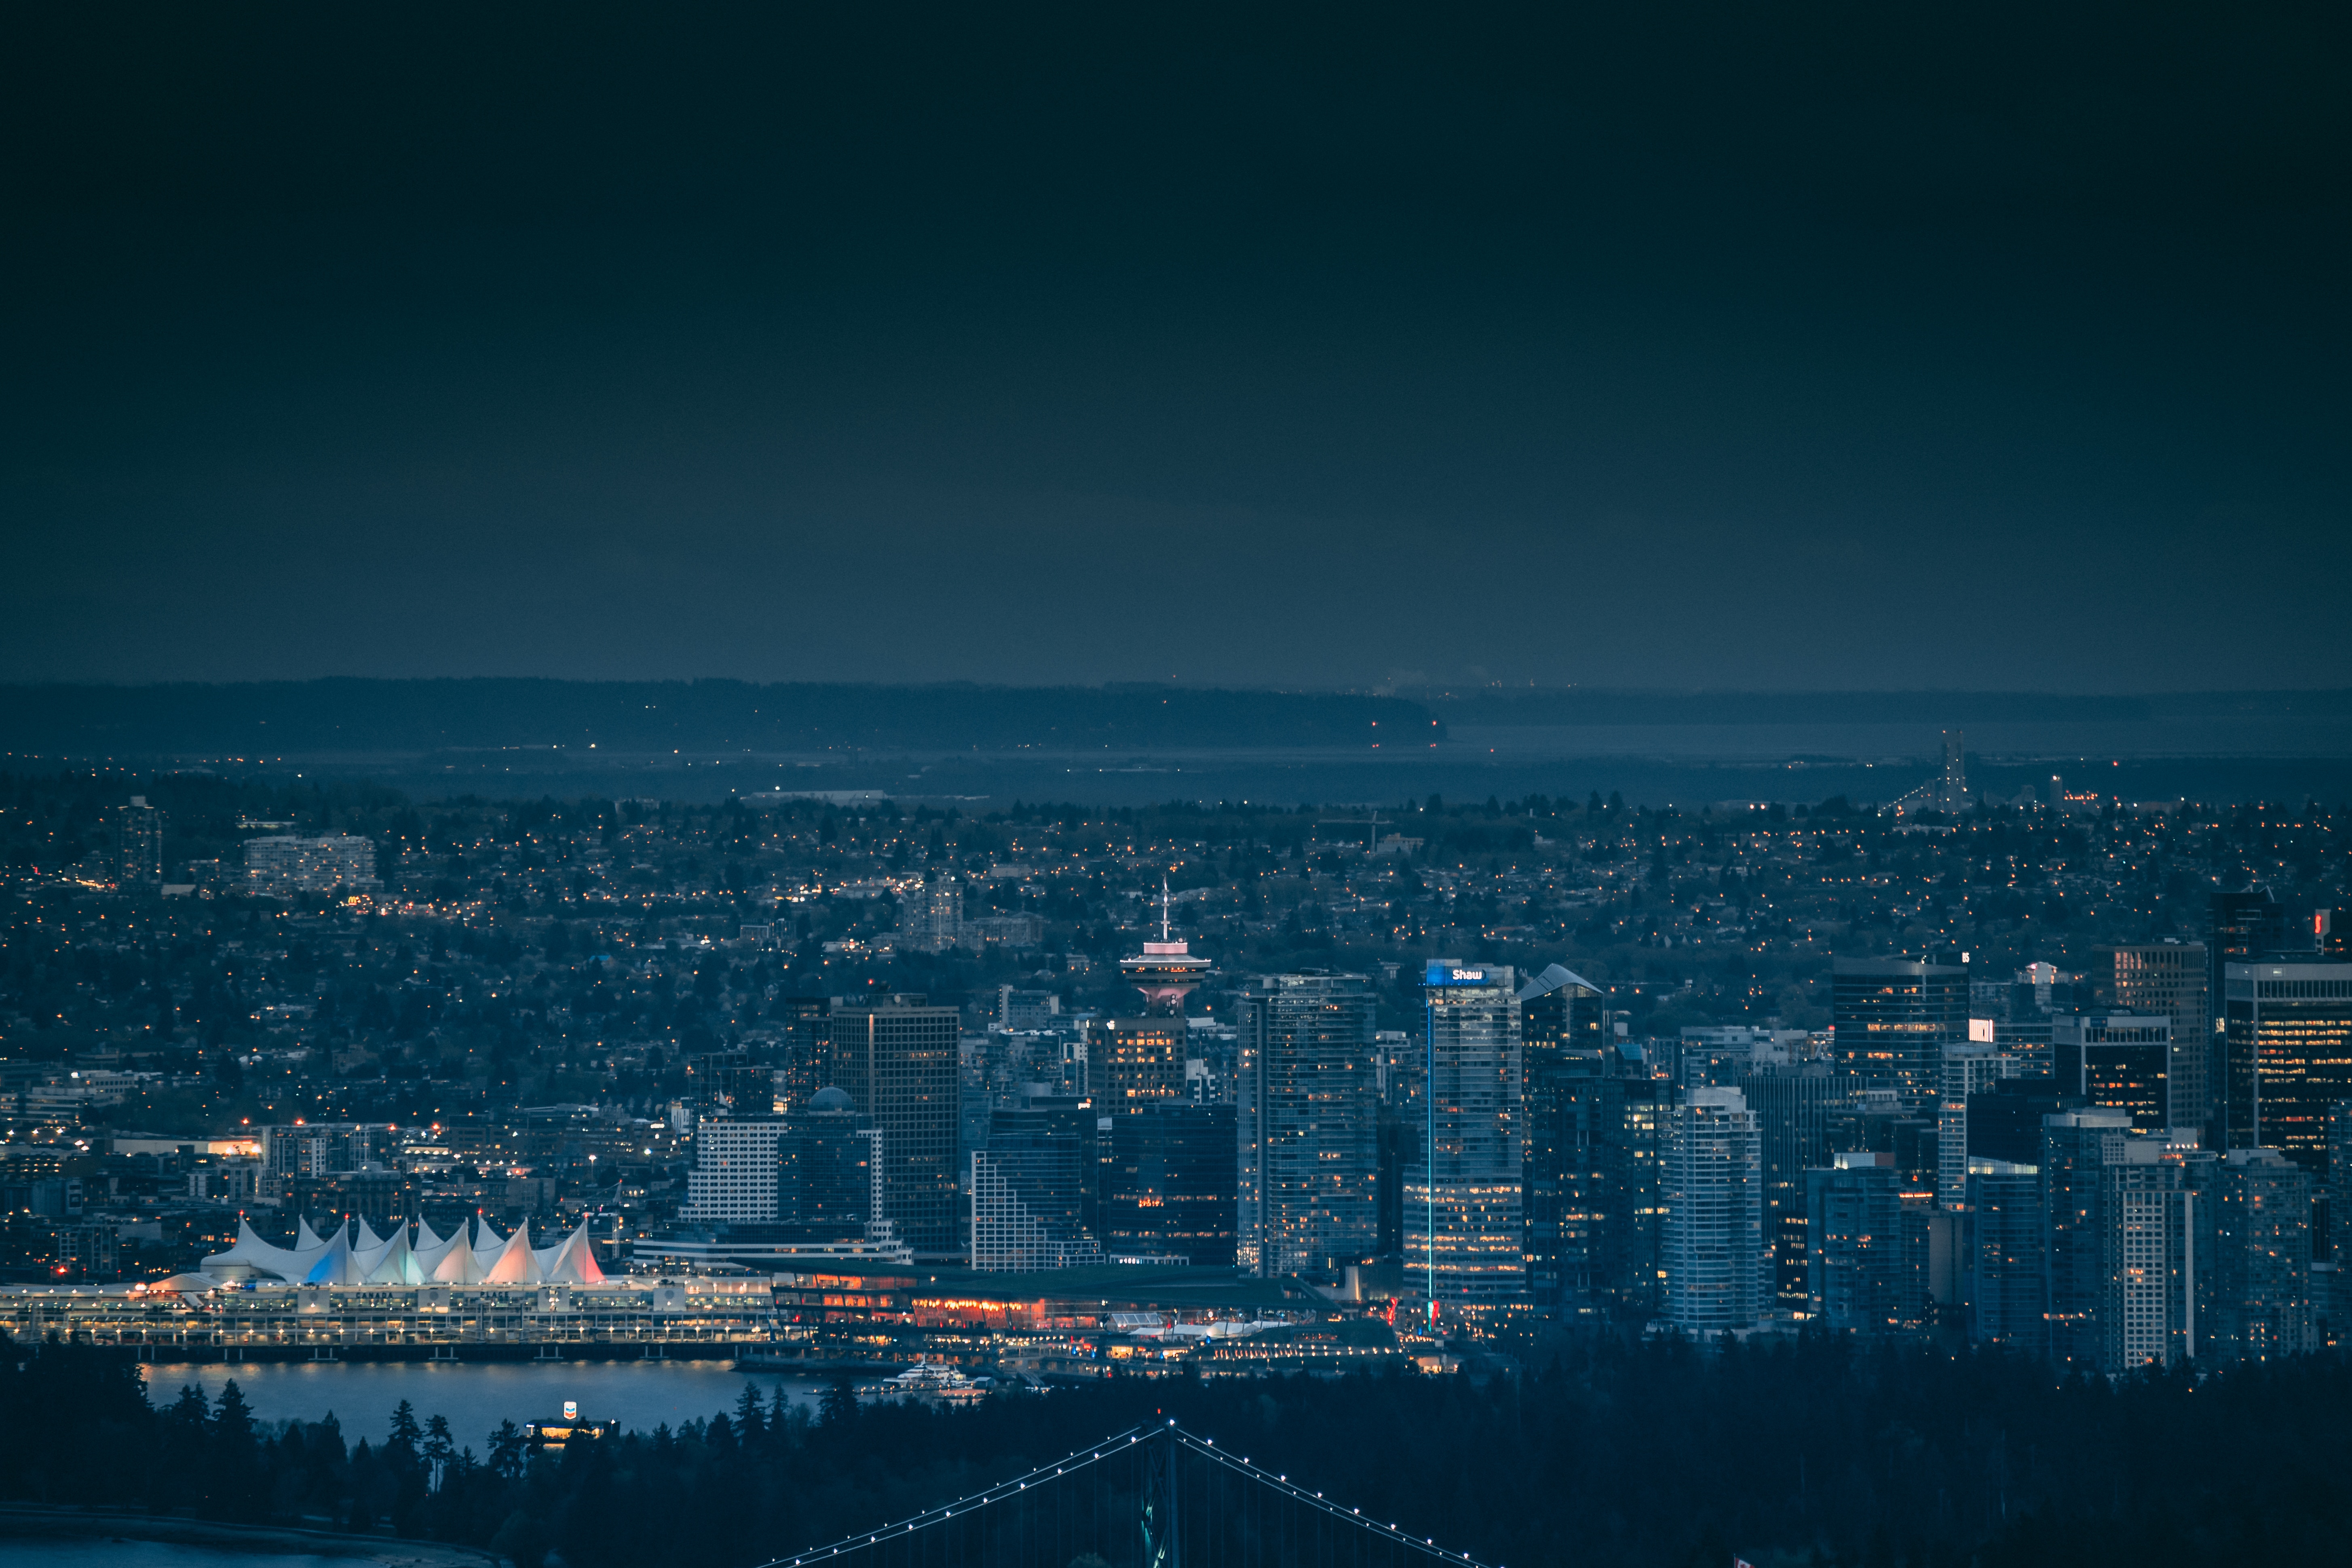 113018 download wallpaper cities, night, canada, city lights, darkness, megapolis, megalopolis, urban landscape, cityscape, vancouver screensavers and pictures for free